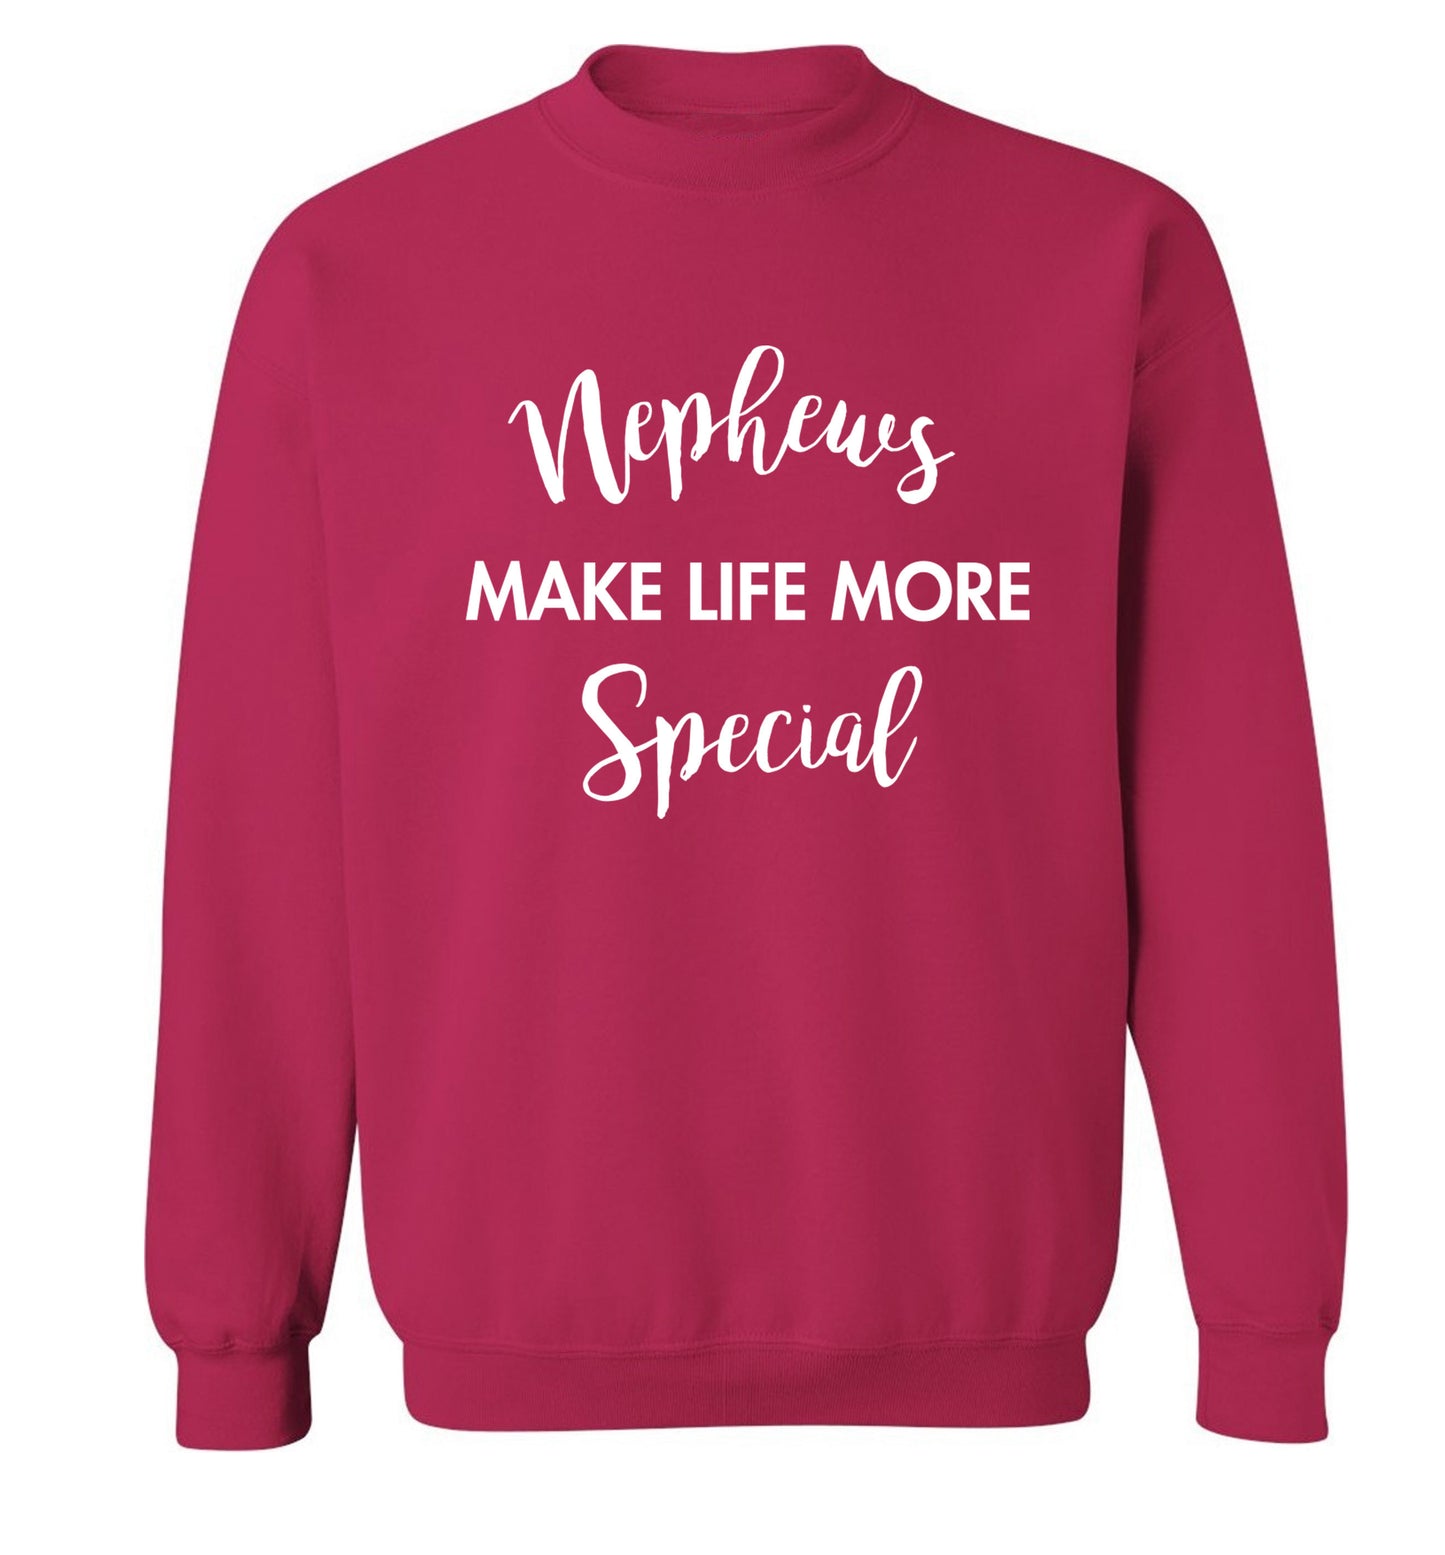 Nephews make life more special Adult's unisex pink Sweater 2XL